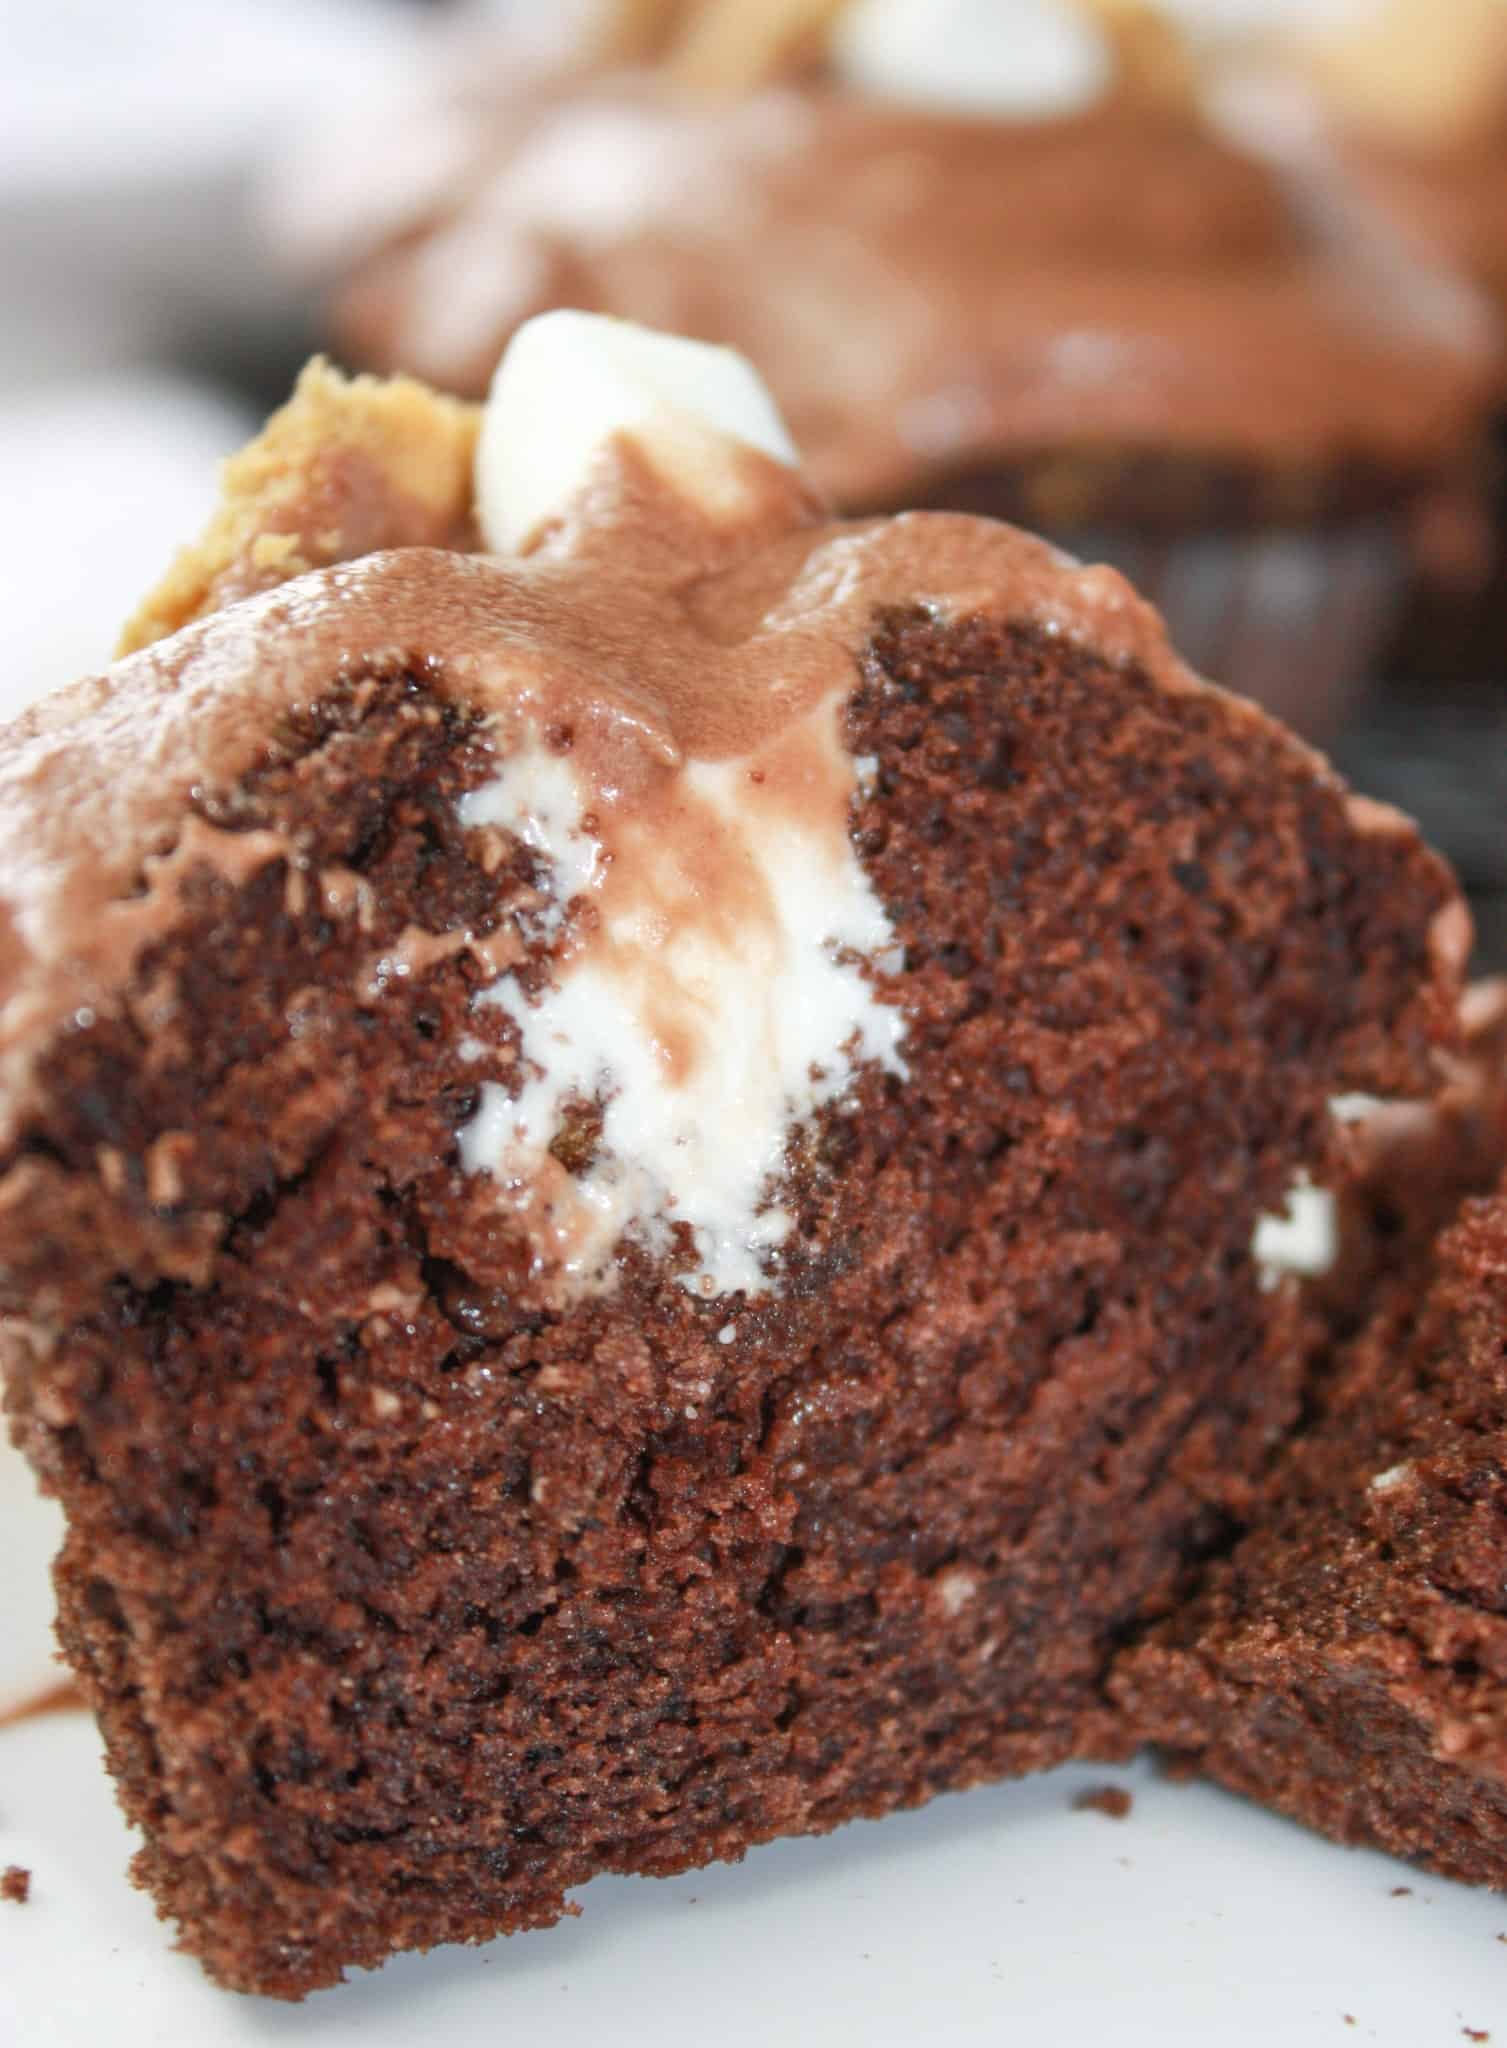 S'mores Cupcakes are a delightful dessert treat that will be enjoyed by young and old alike.  These gluten free cupcakes will bring back memories of campfire gatherings any time of the year.